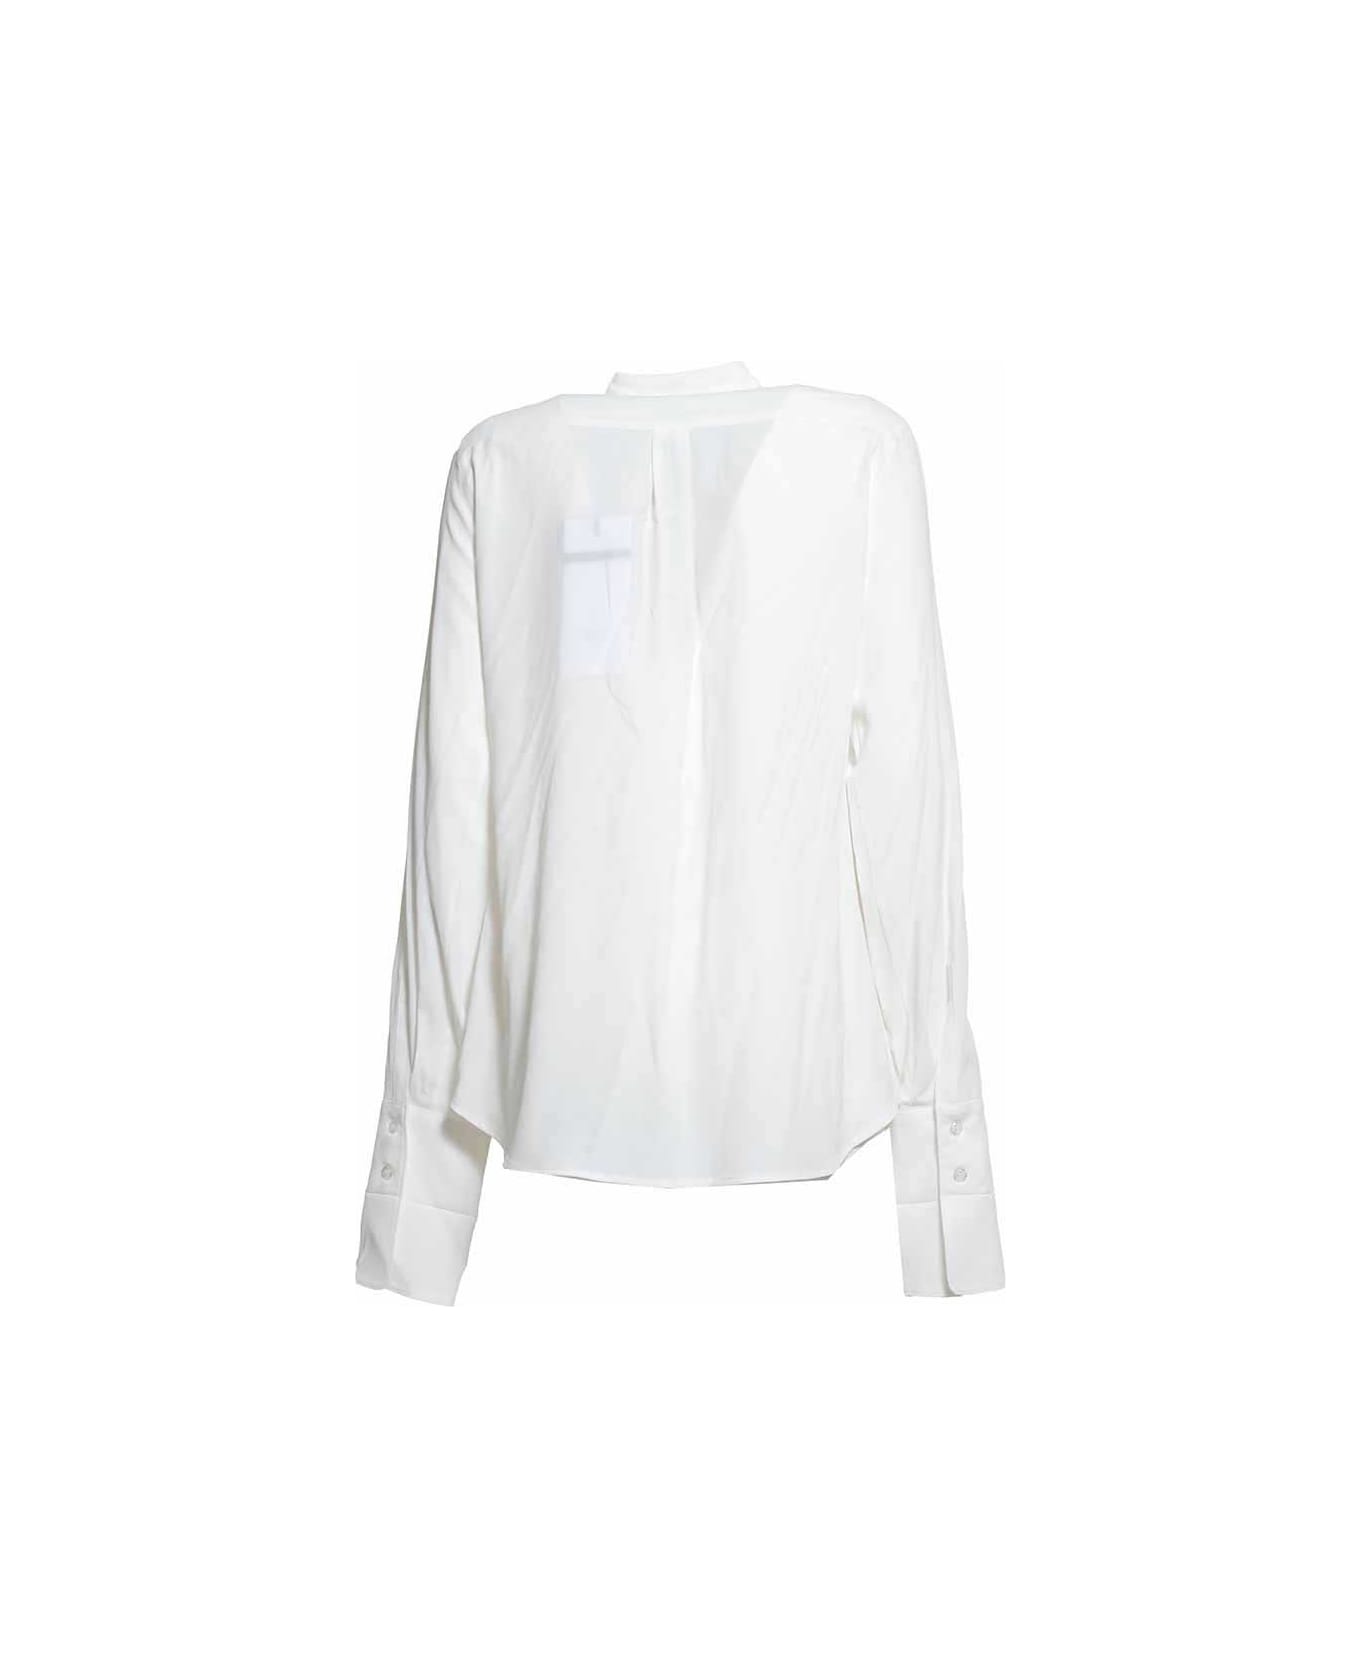 SportMax Buttoned Long-sleeved Shirt - Bianco シャツ